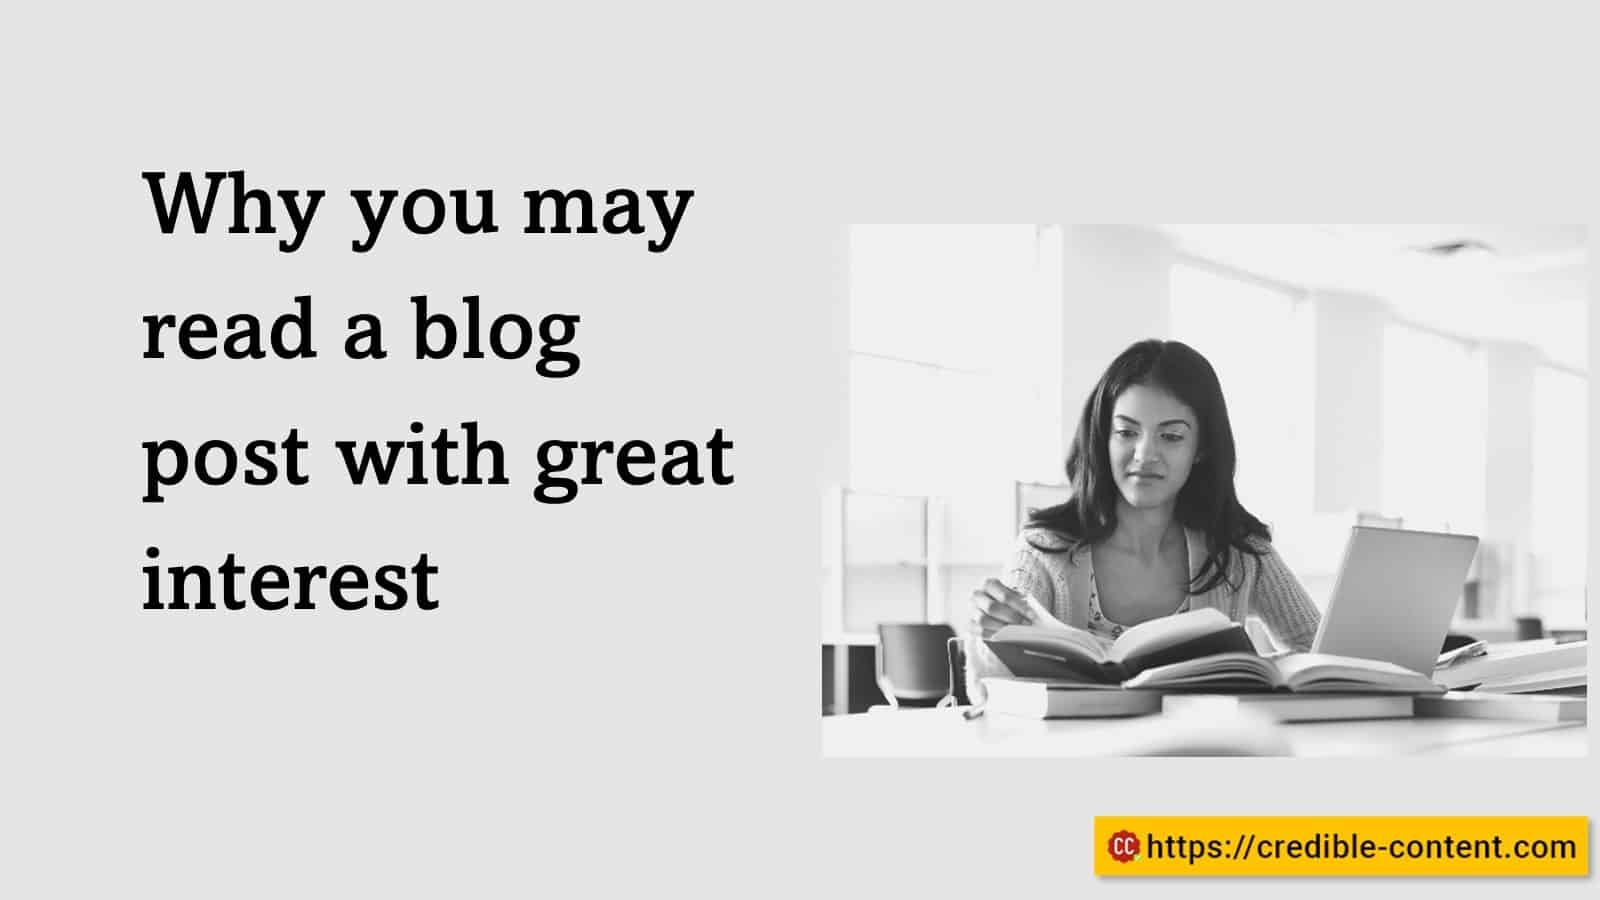 Why you may read a blog post with great interest